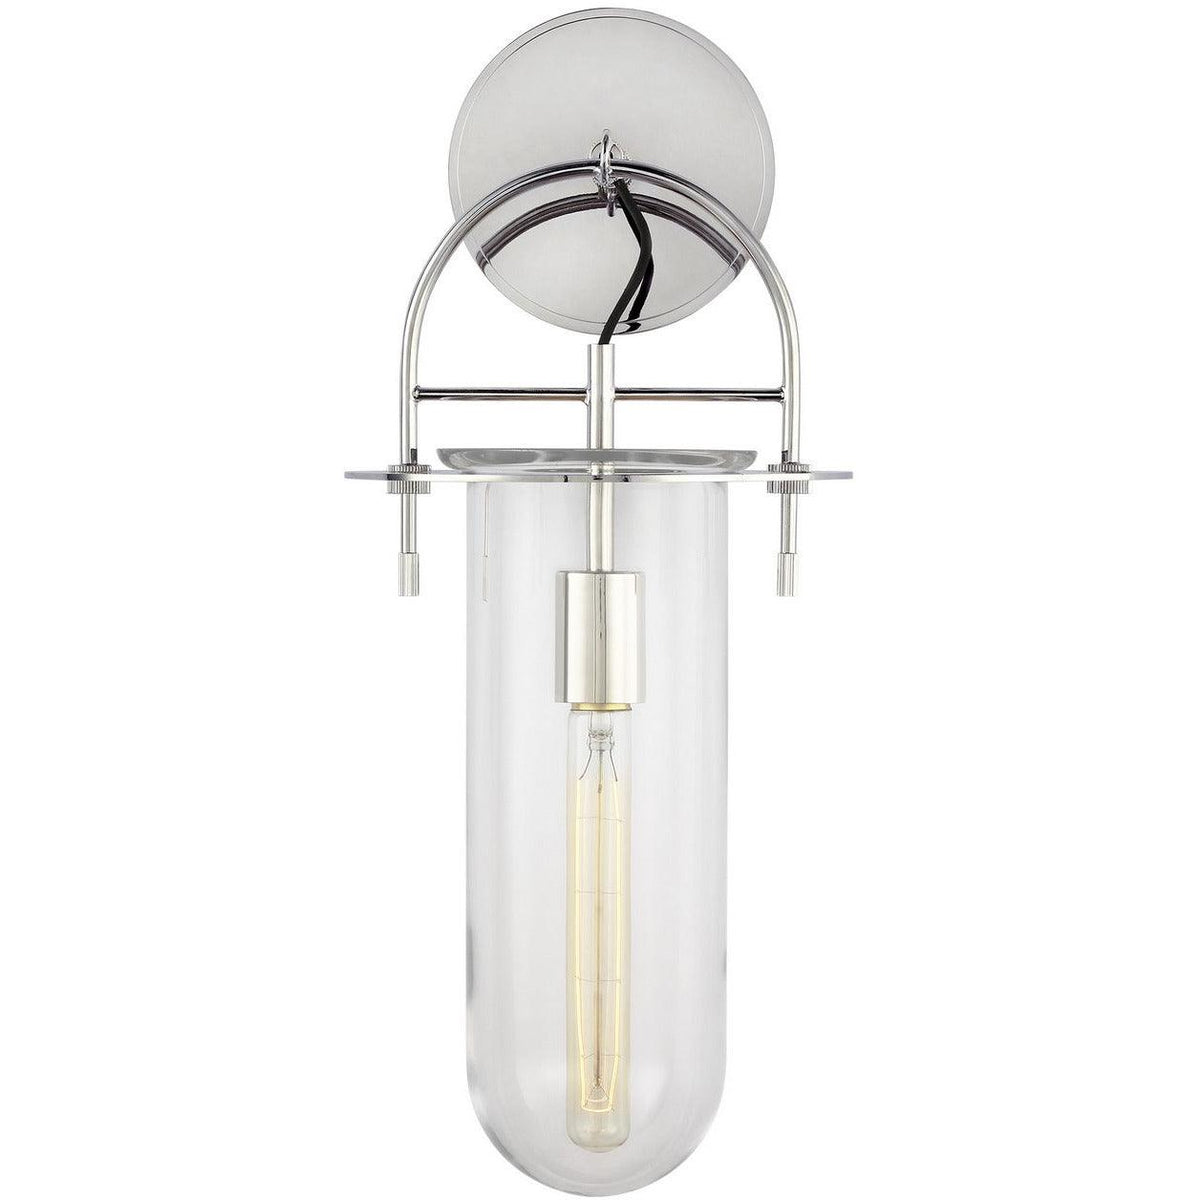 Visual Comfort Studio Collection - Nuance Wall Sconce - KW1051PN | Montreal Lighting & Hardware